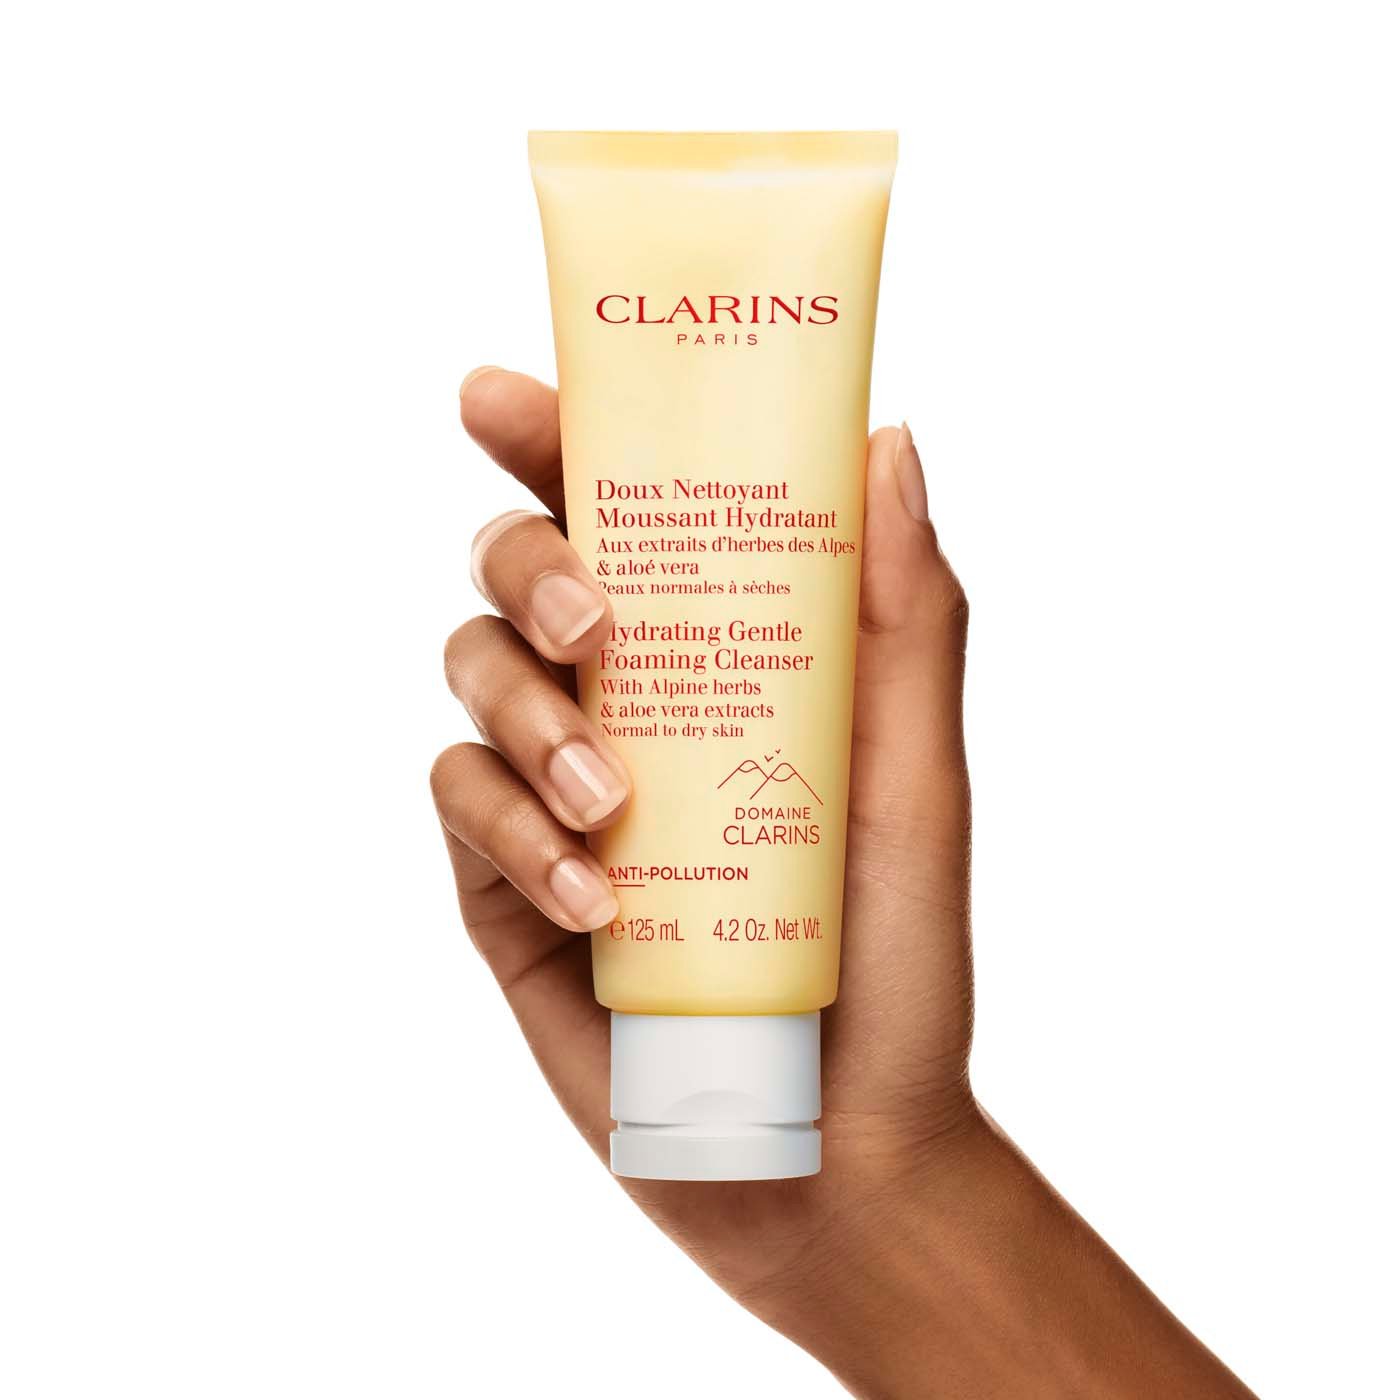  clarins, hydrating gentle foaming cleanser